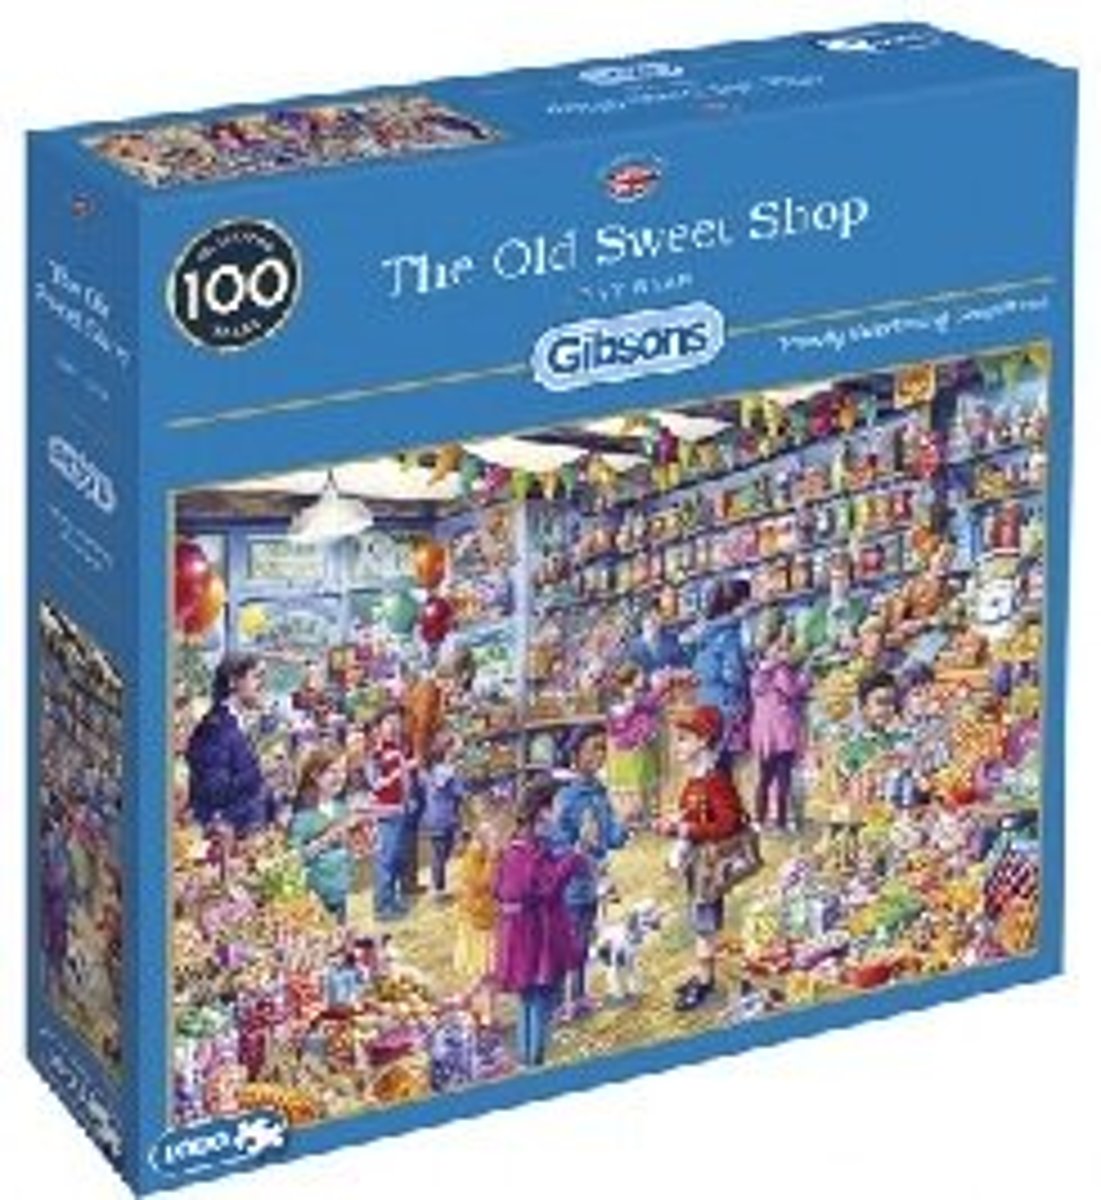 The old sweet shop - tony ryan - puzzel - gibsons - 1000 - 68x49